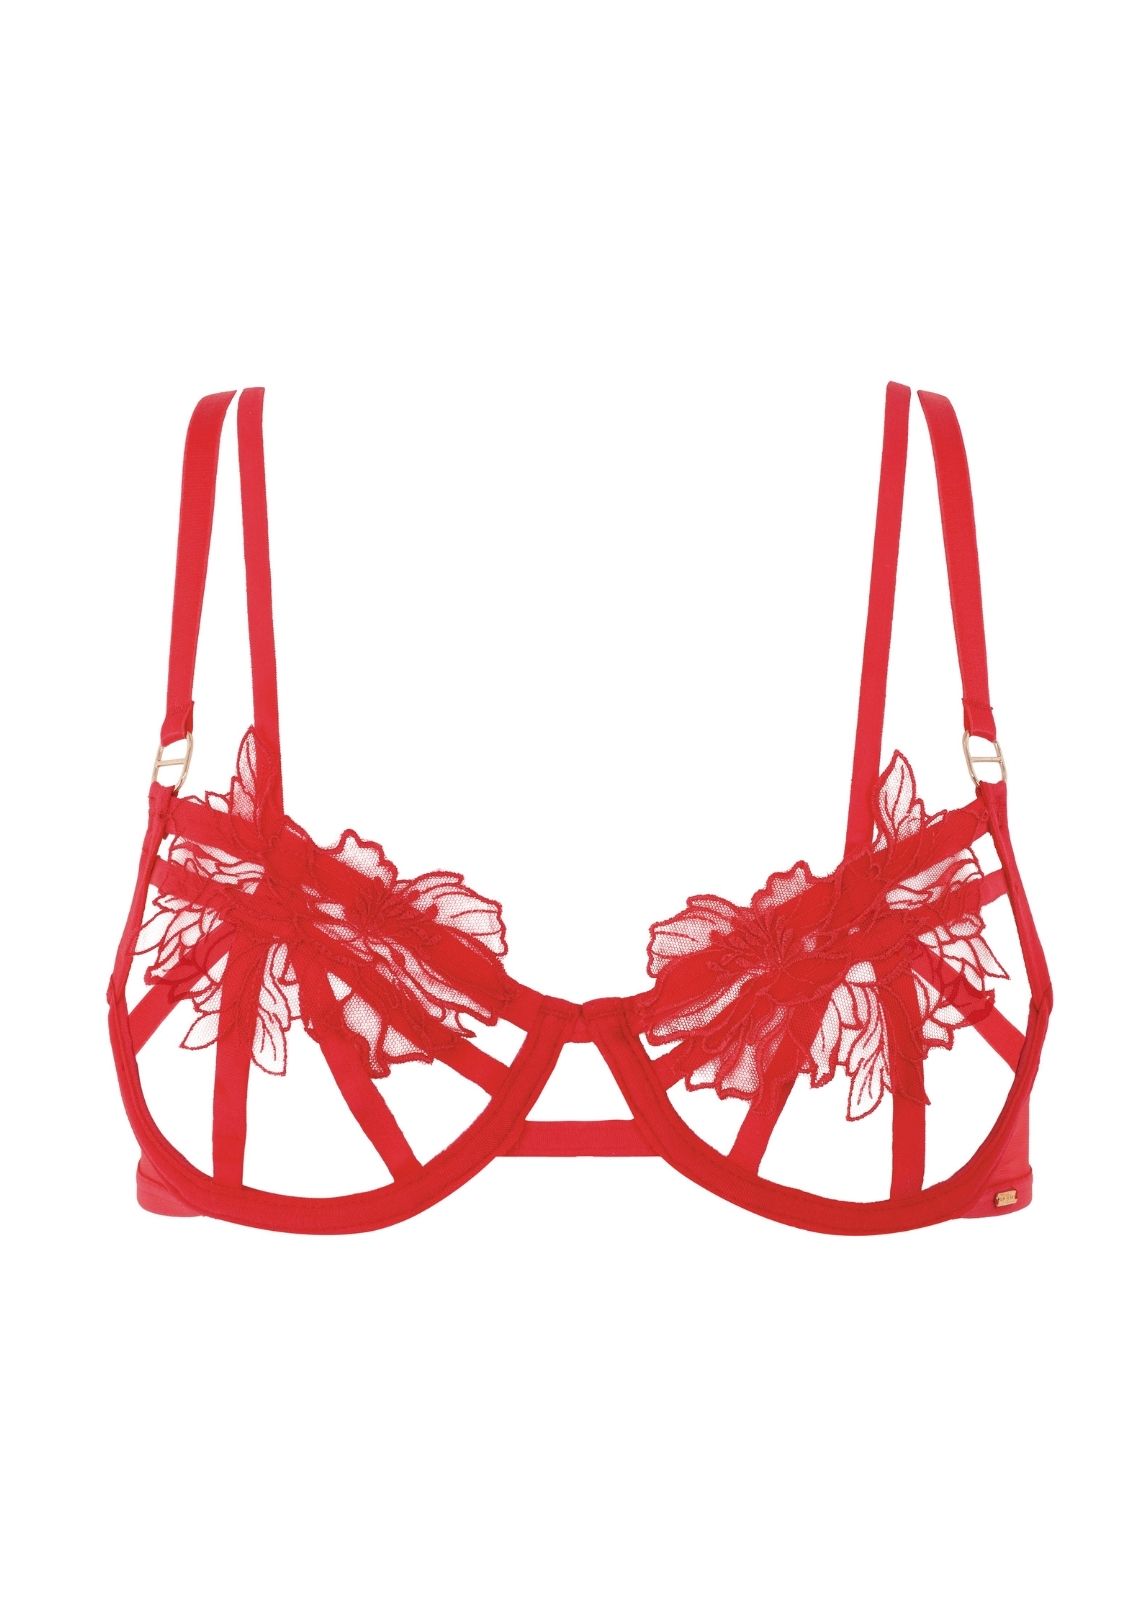 Bluebella Pride Carmen lace 1/4 cup bra in red - ShopStyle